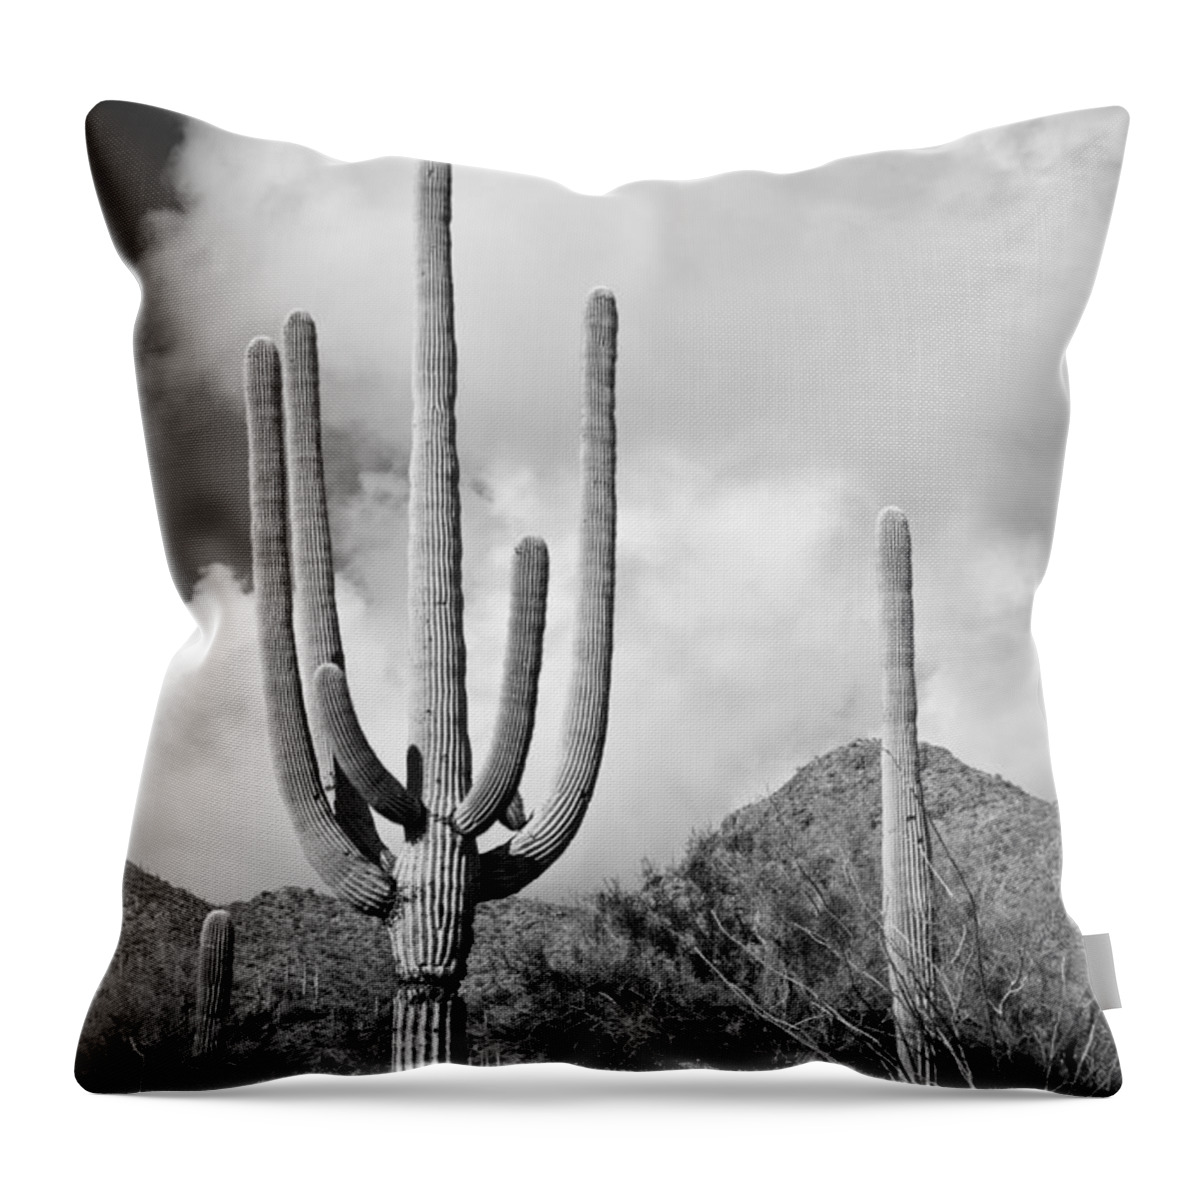 Saguaro Throw Pillow featuring the photograph Saguaro by Olivier Steiner